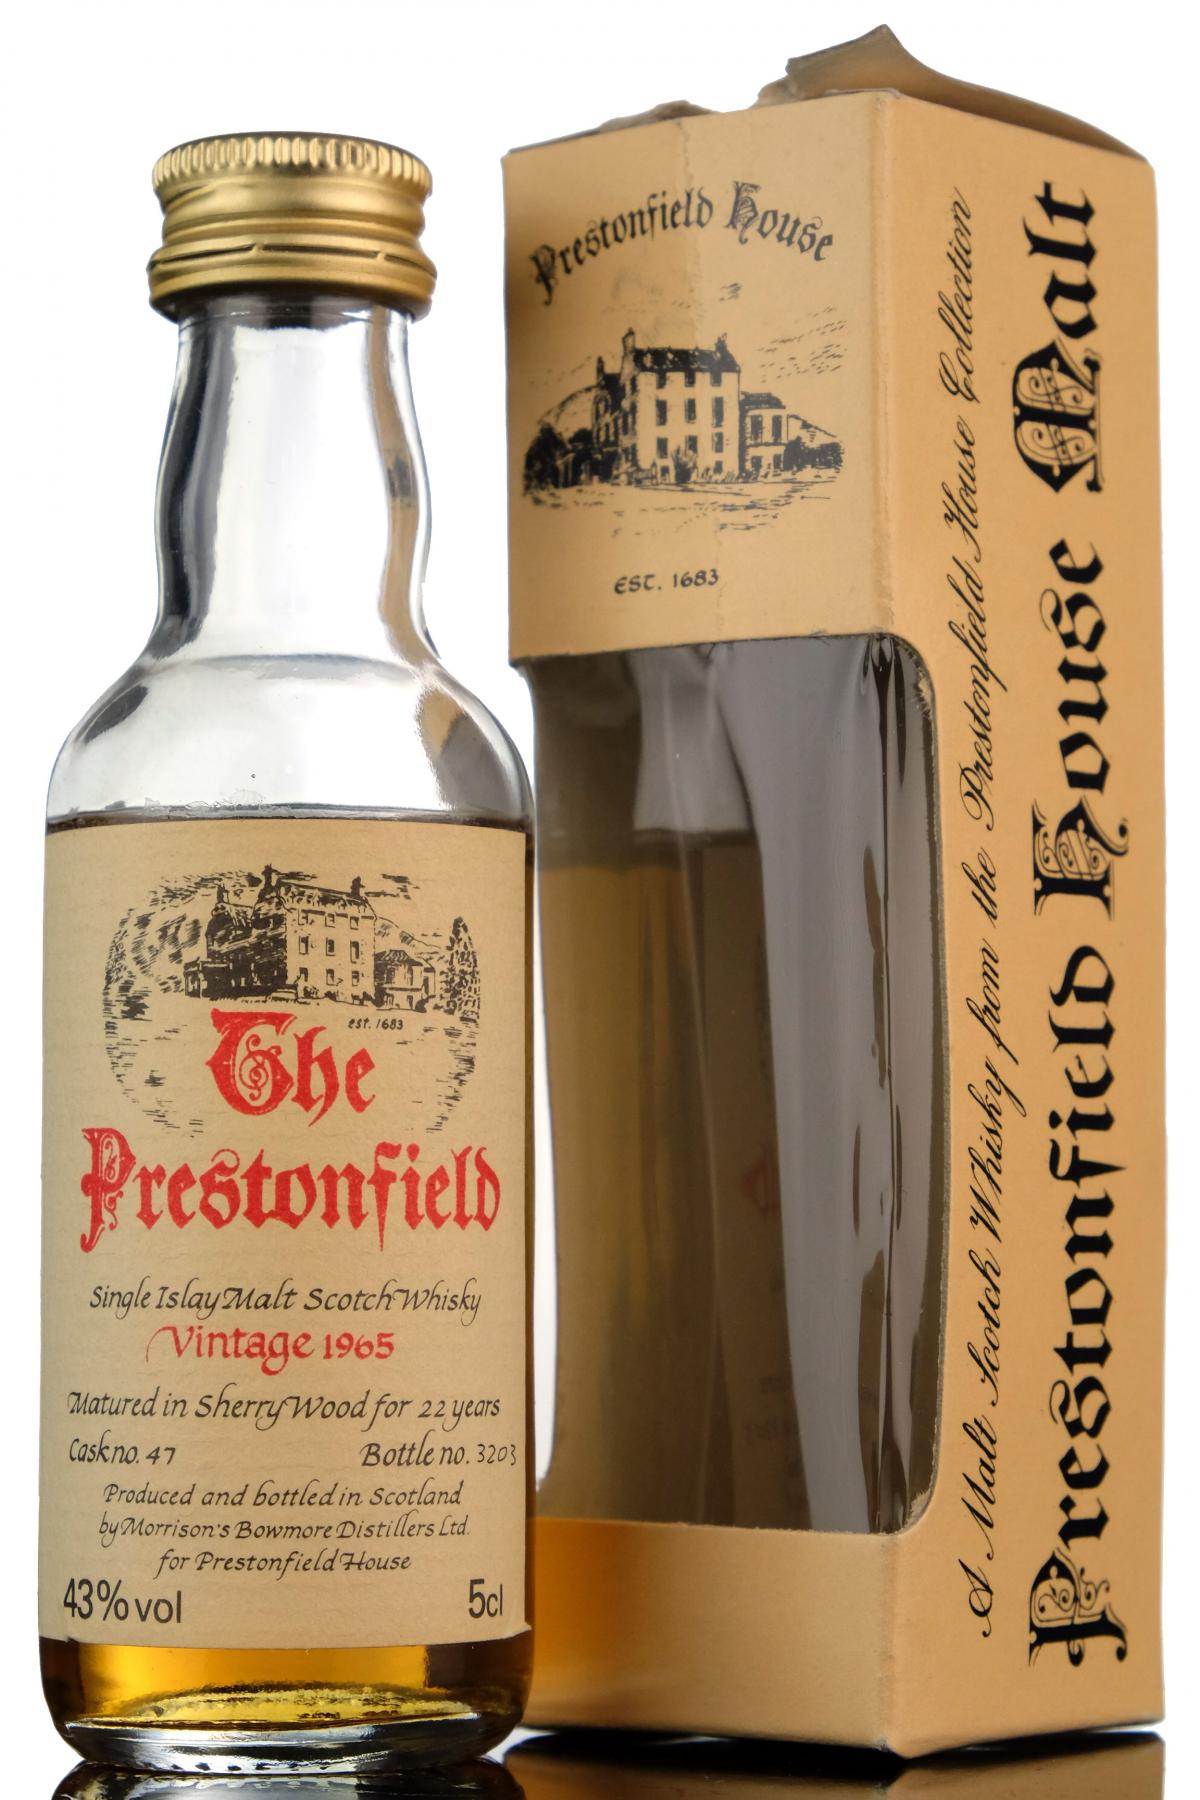 Bowmore 1965 - 22 Year Old - The Prestonfield Miniature